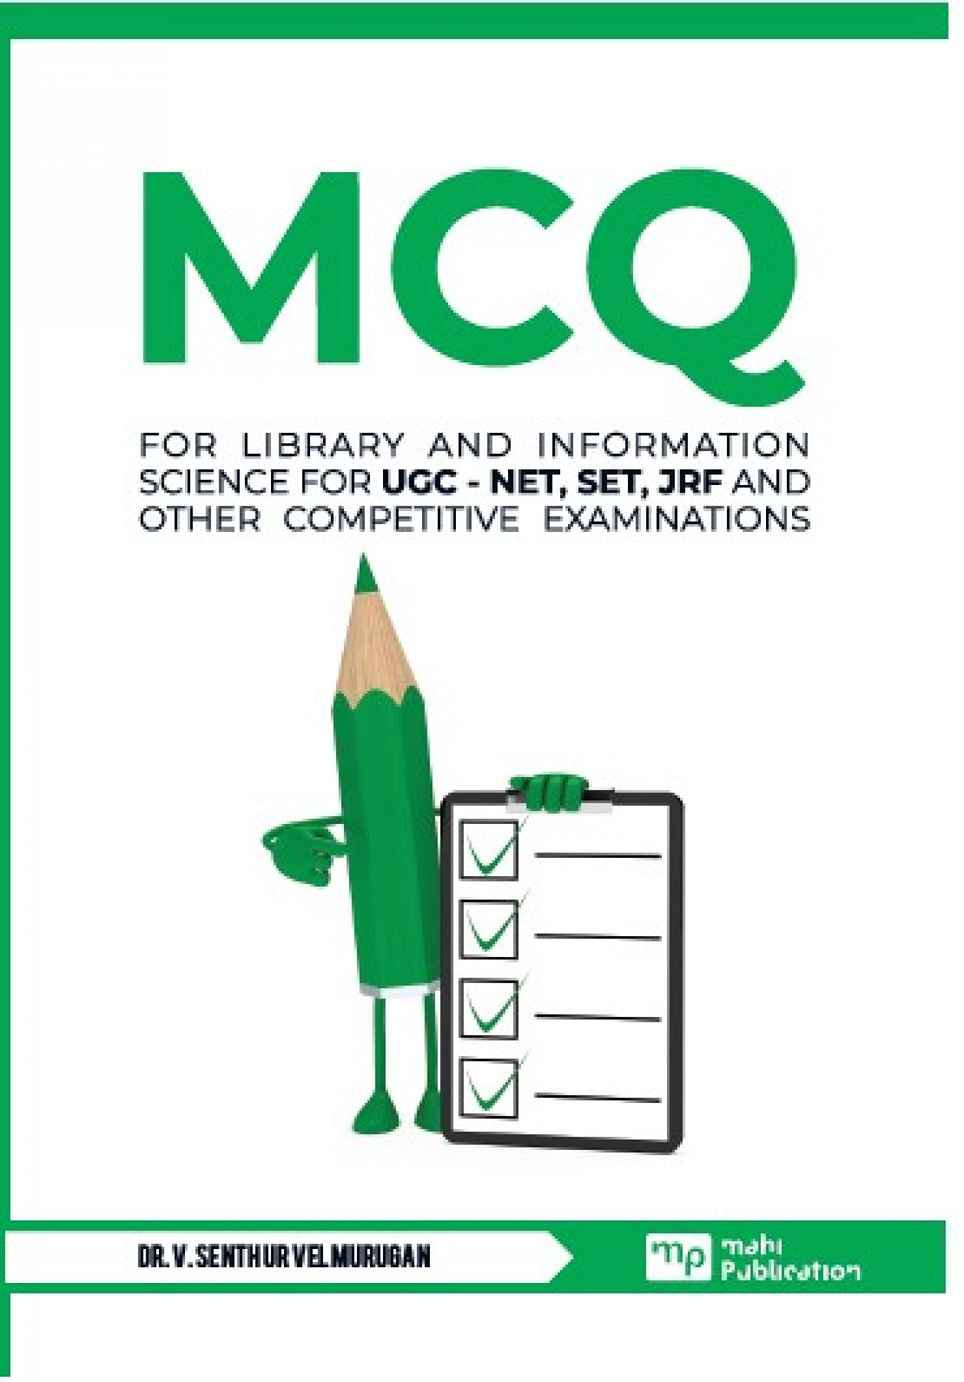 Mcq For Library And Information Science For Ugc - Net, Set, Jrf And Other Competitive EXAminations